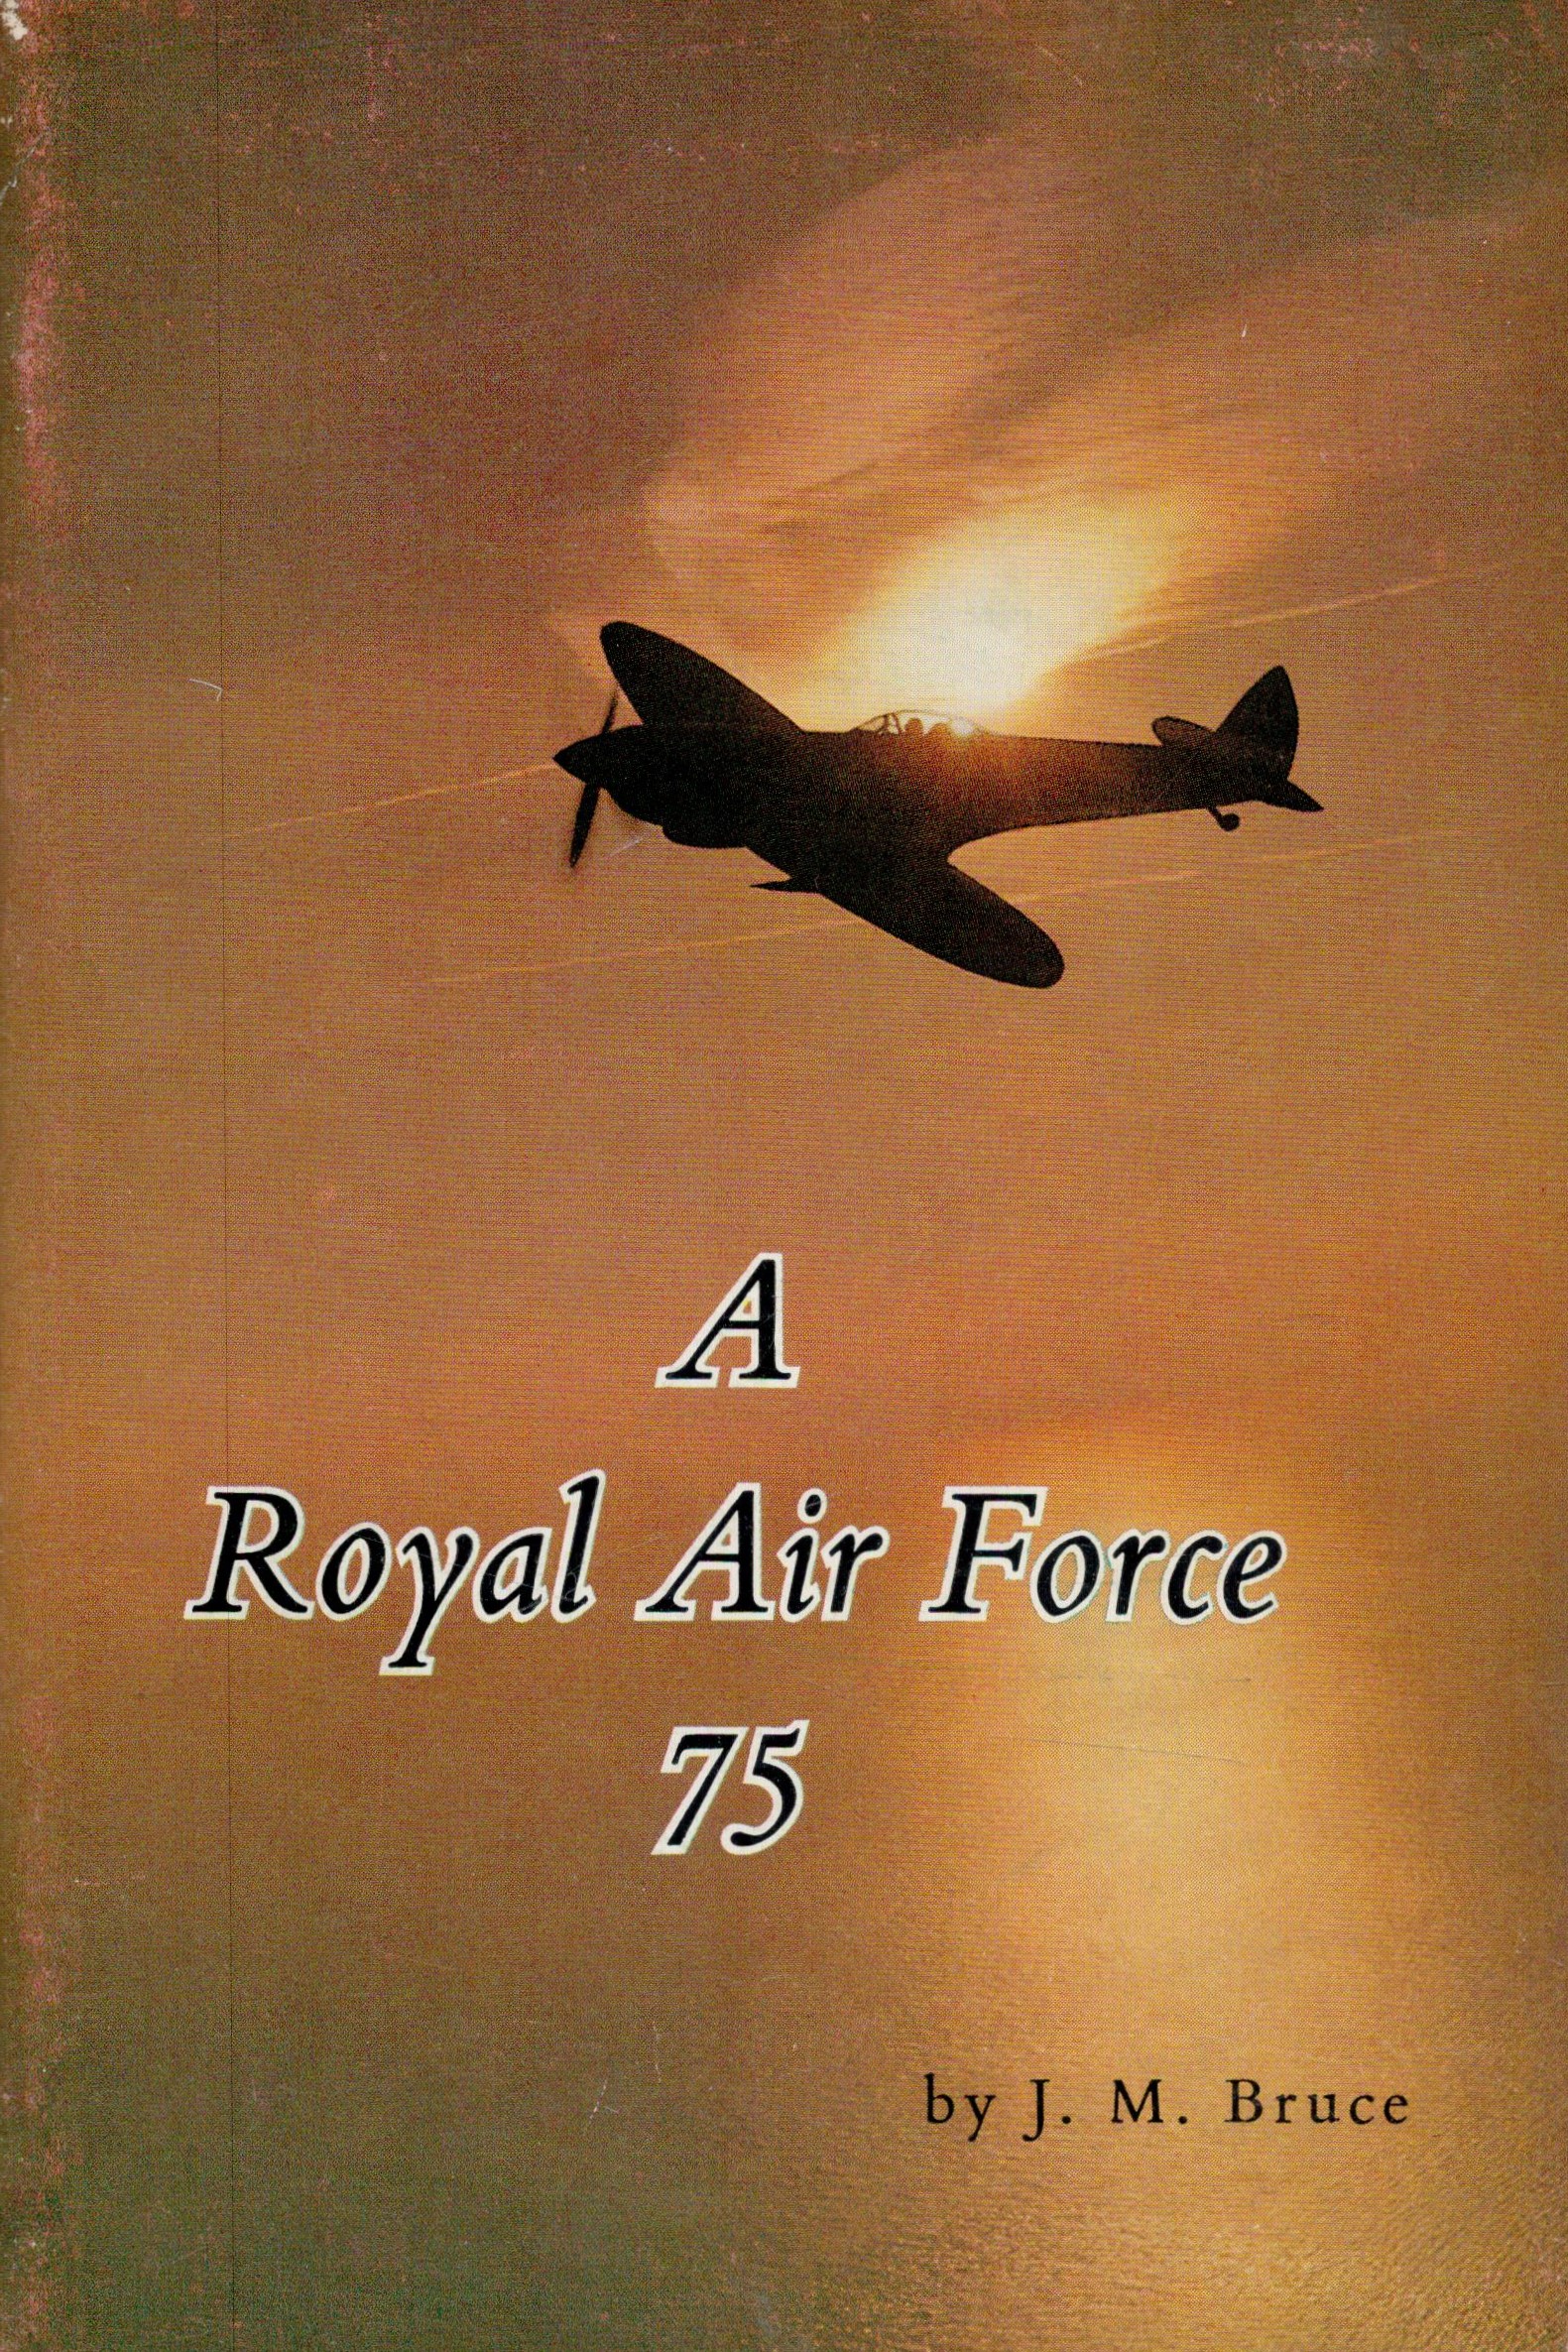 J. M. Bruce. A Royal Air Force 75. a WW2 paperback book in fair condition. Signed by the author.